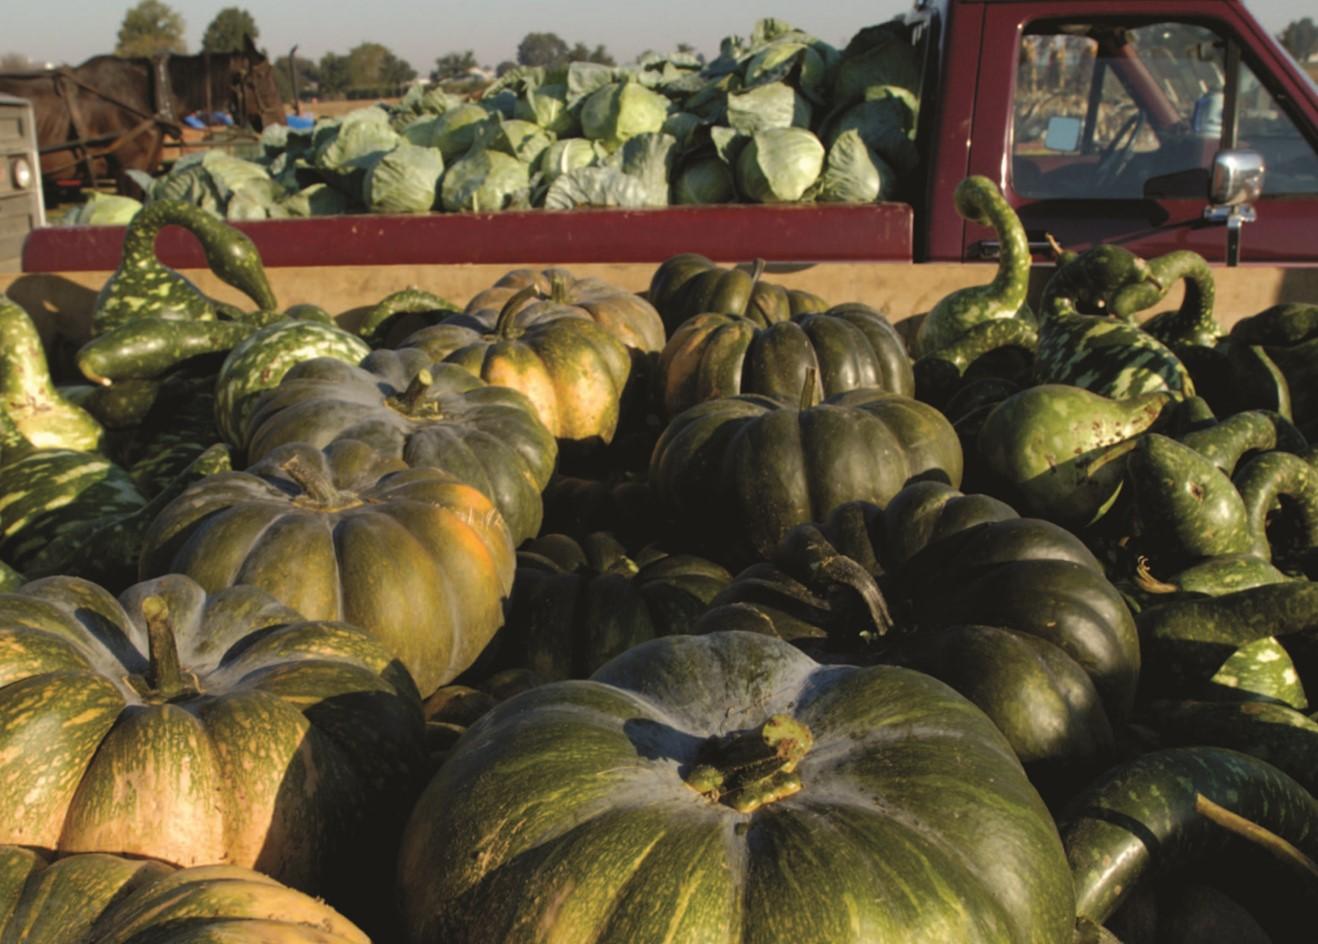 Pick-up trucks loaded with green pumpkins and goards.